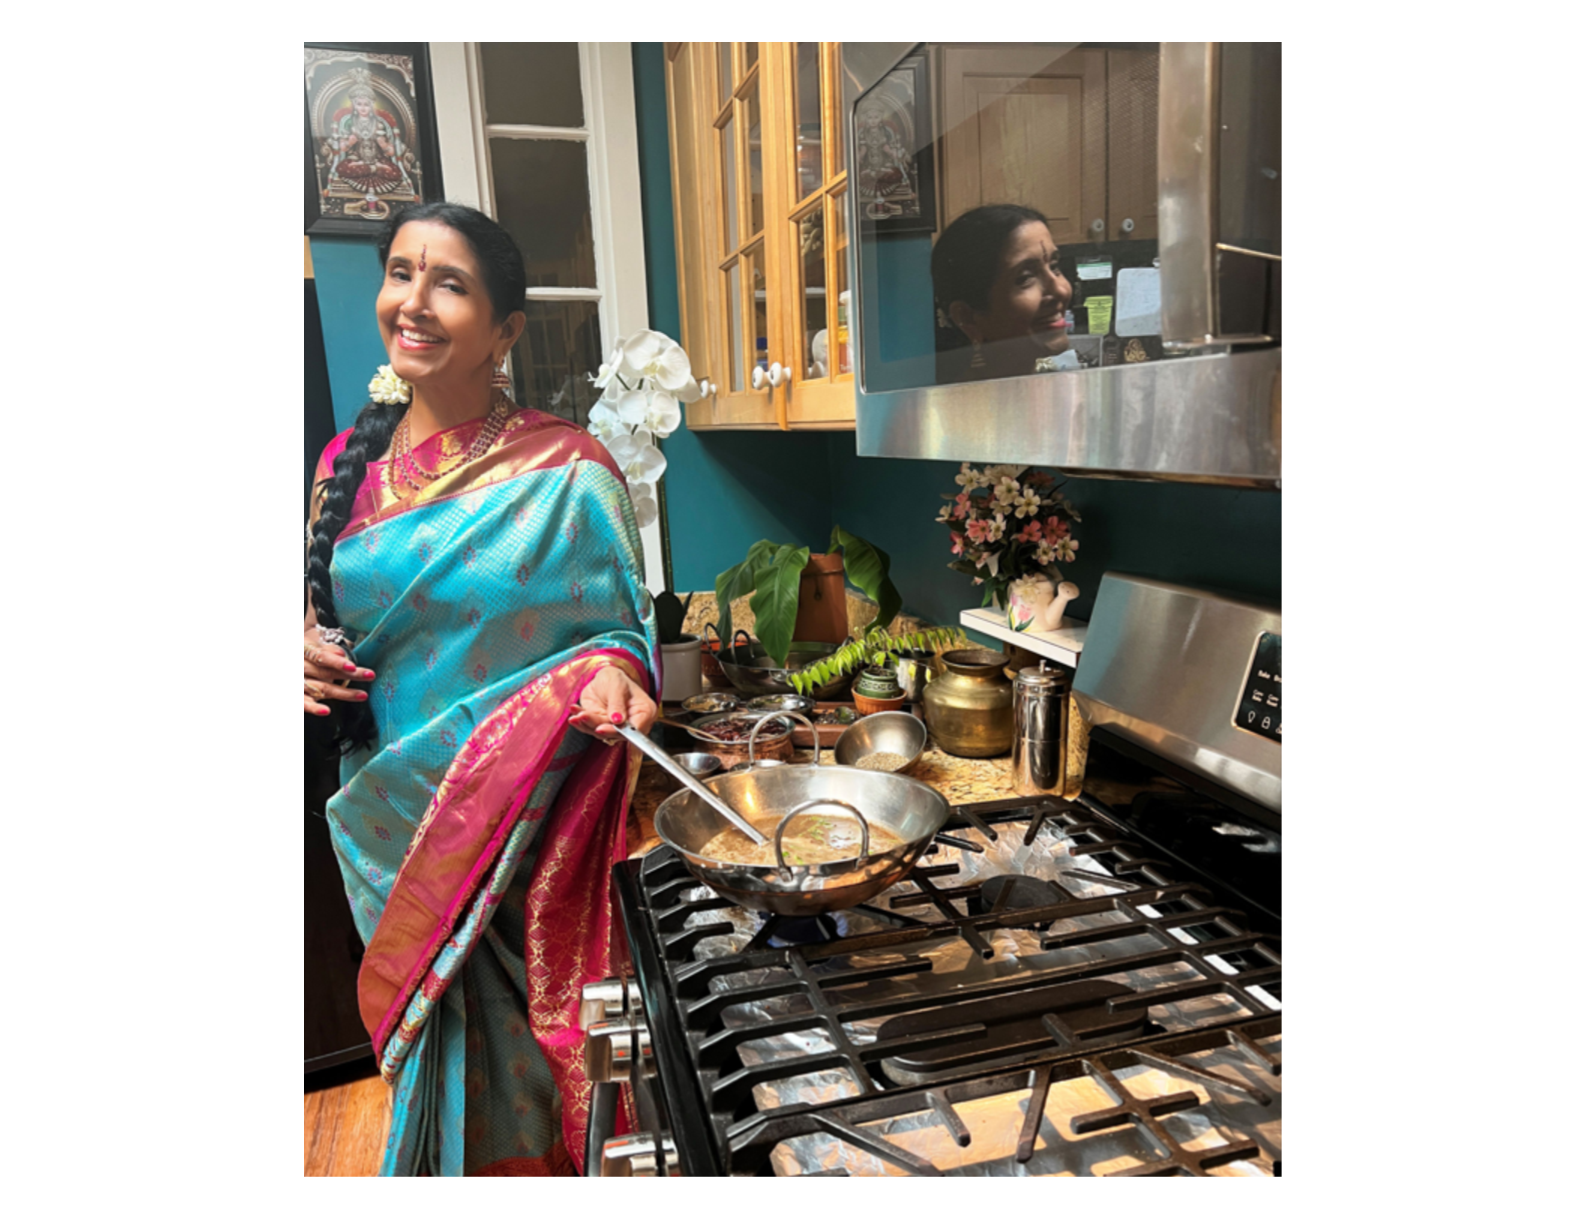 a woman wearing traditional Indian clothing stirring a pot on the stove